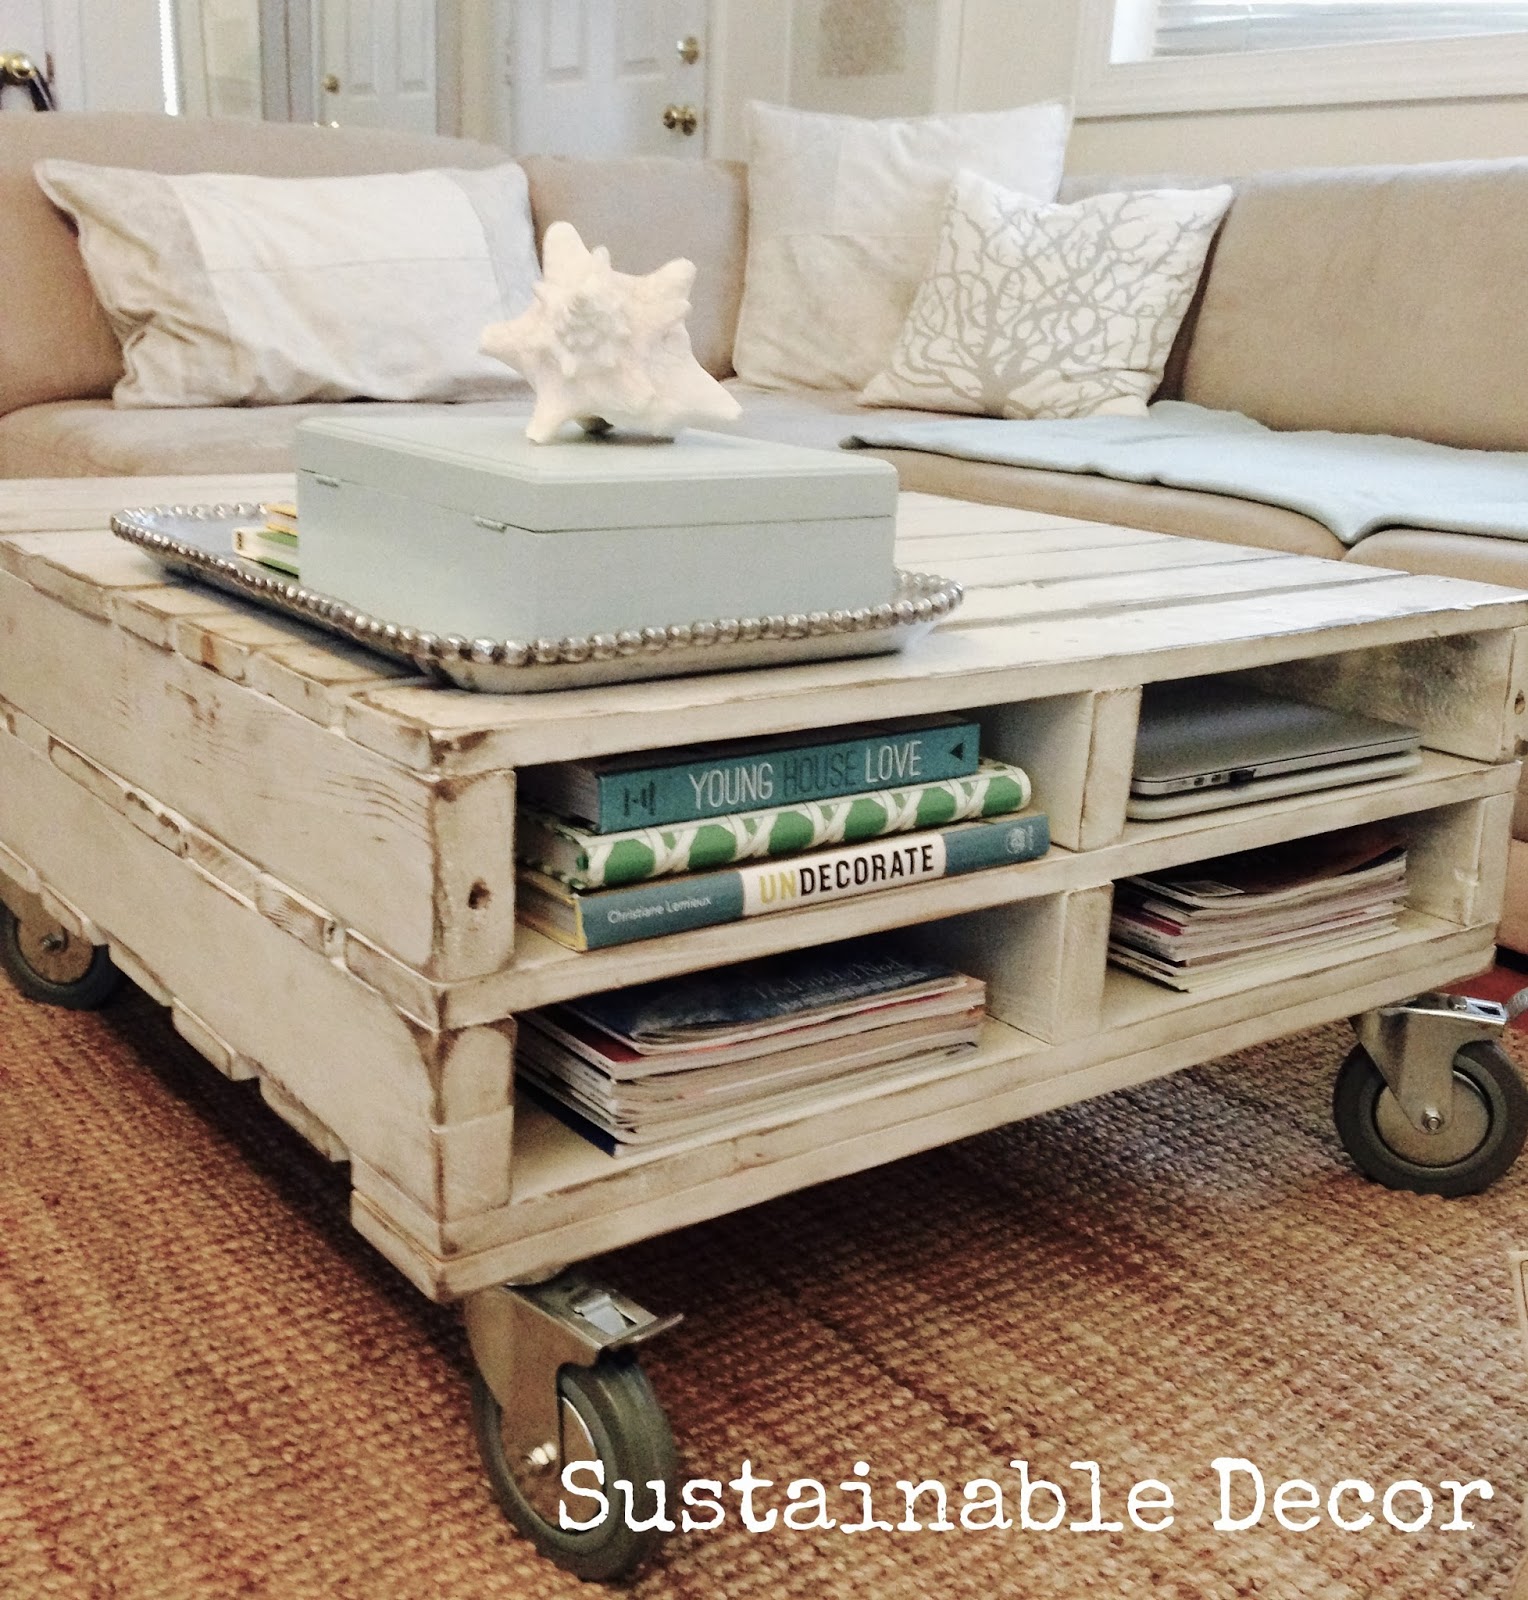 Sustainable Decor: Upcycled Pallet Coffee Table